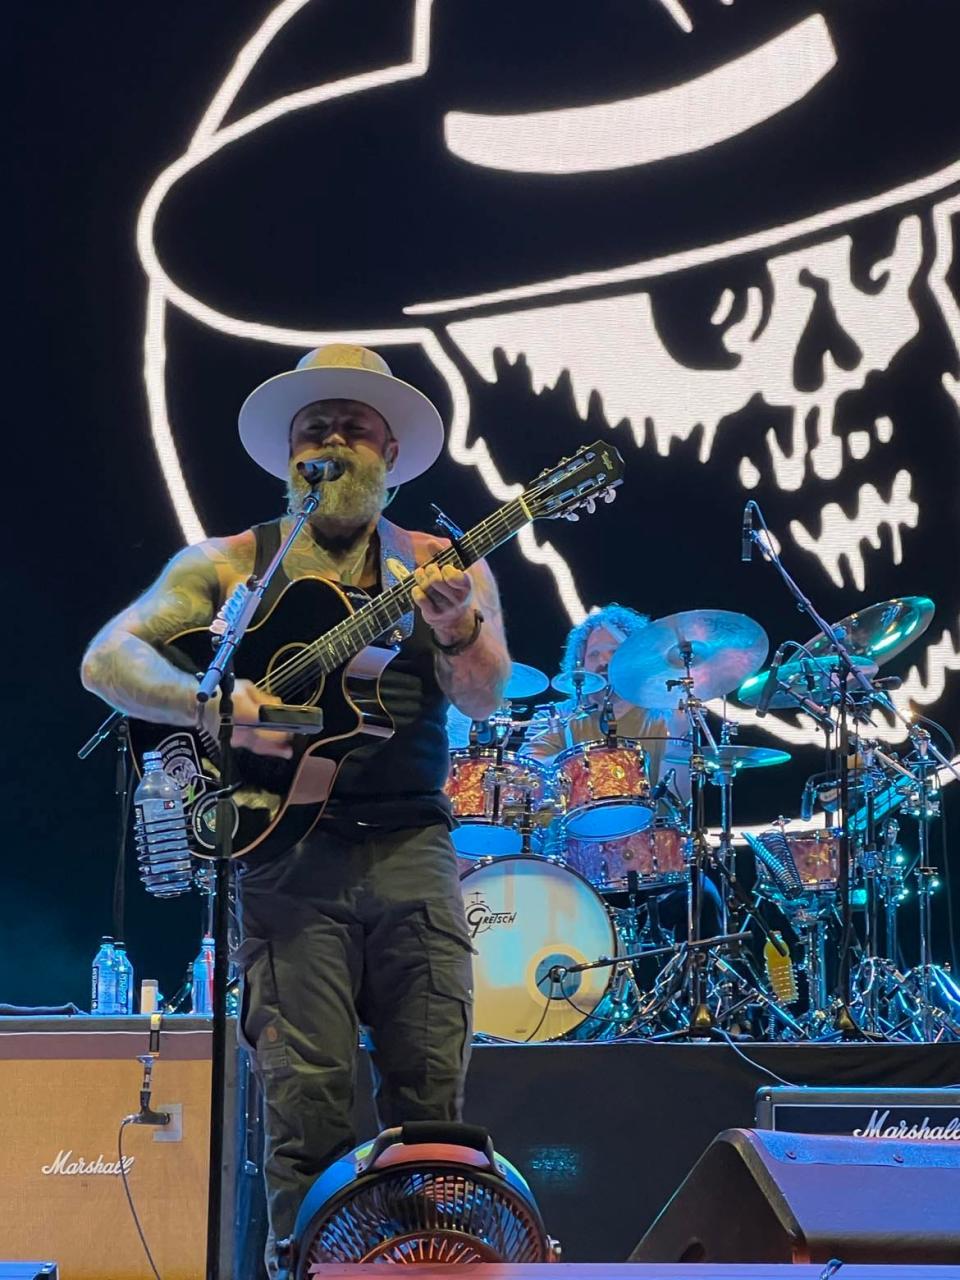 Zac Brown of the Zac Brown Band performs on Saturday night during the Concert for Legends at Tom Benson Hall of Fame Stadium in Canton. The show closed out the major events of the Pro Football Hall of Fame Festival.